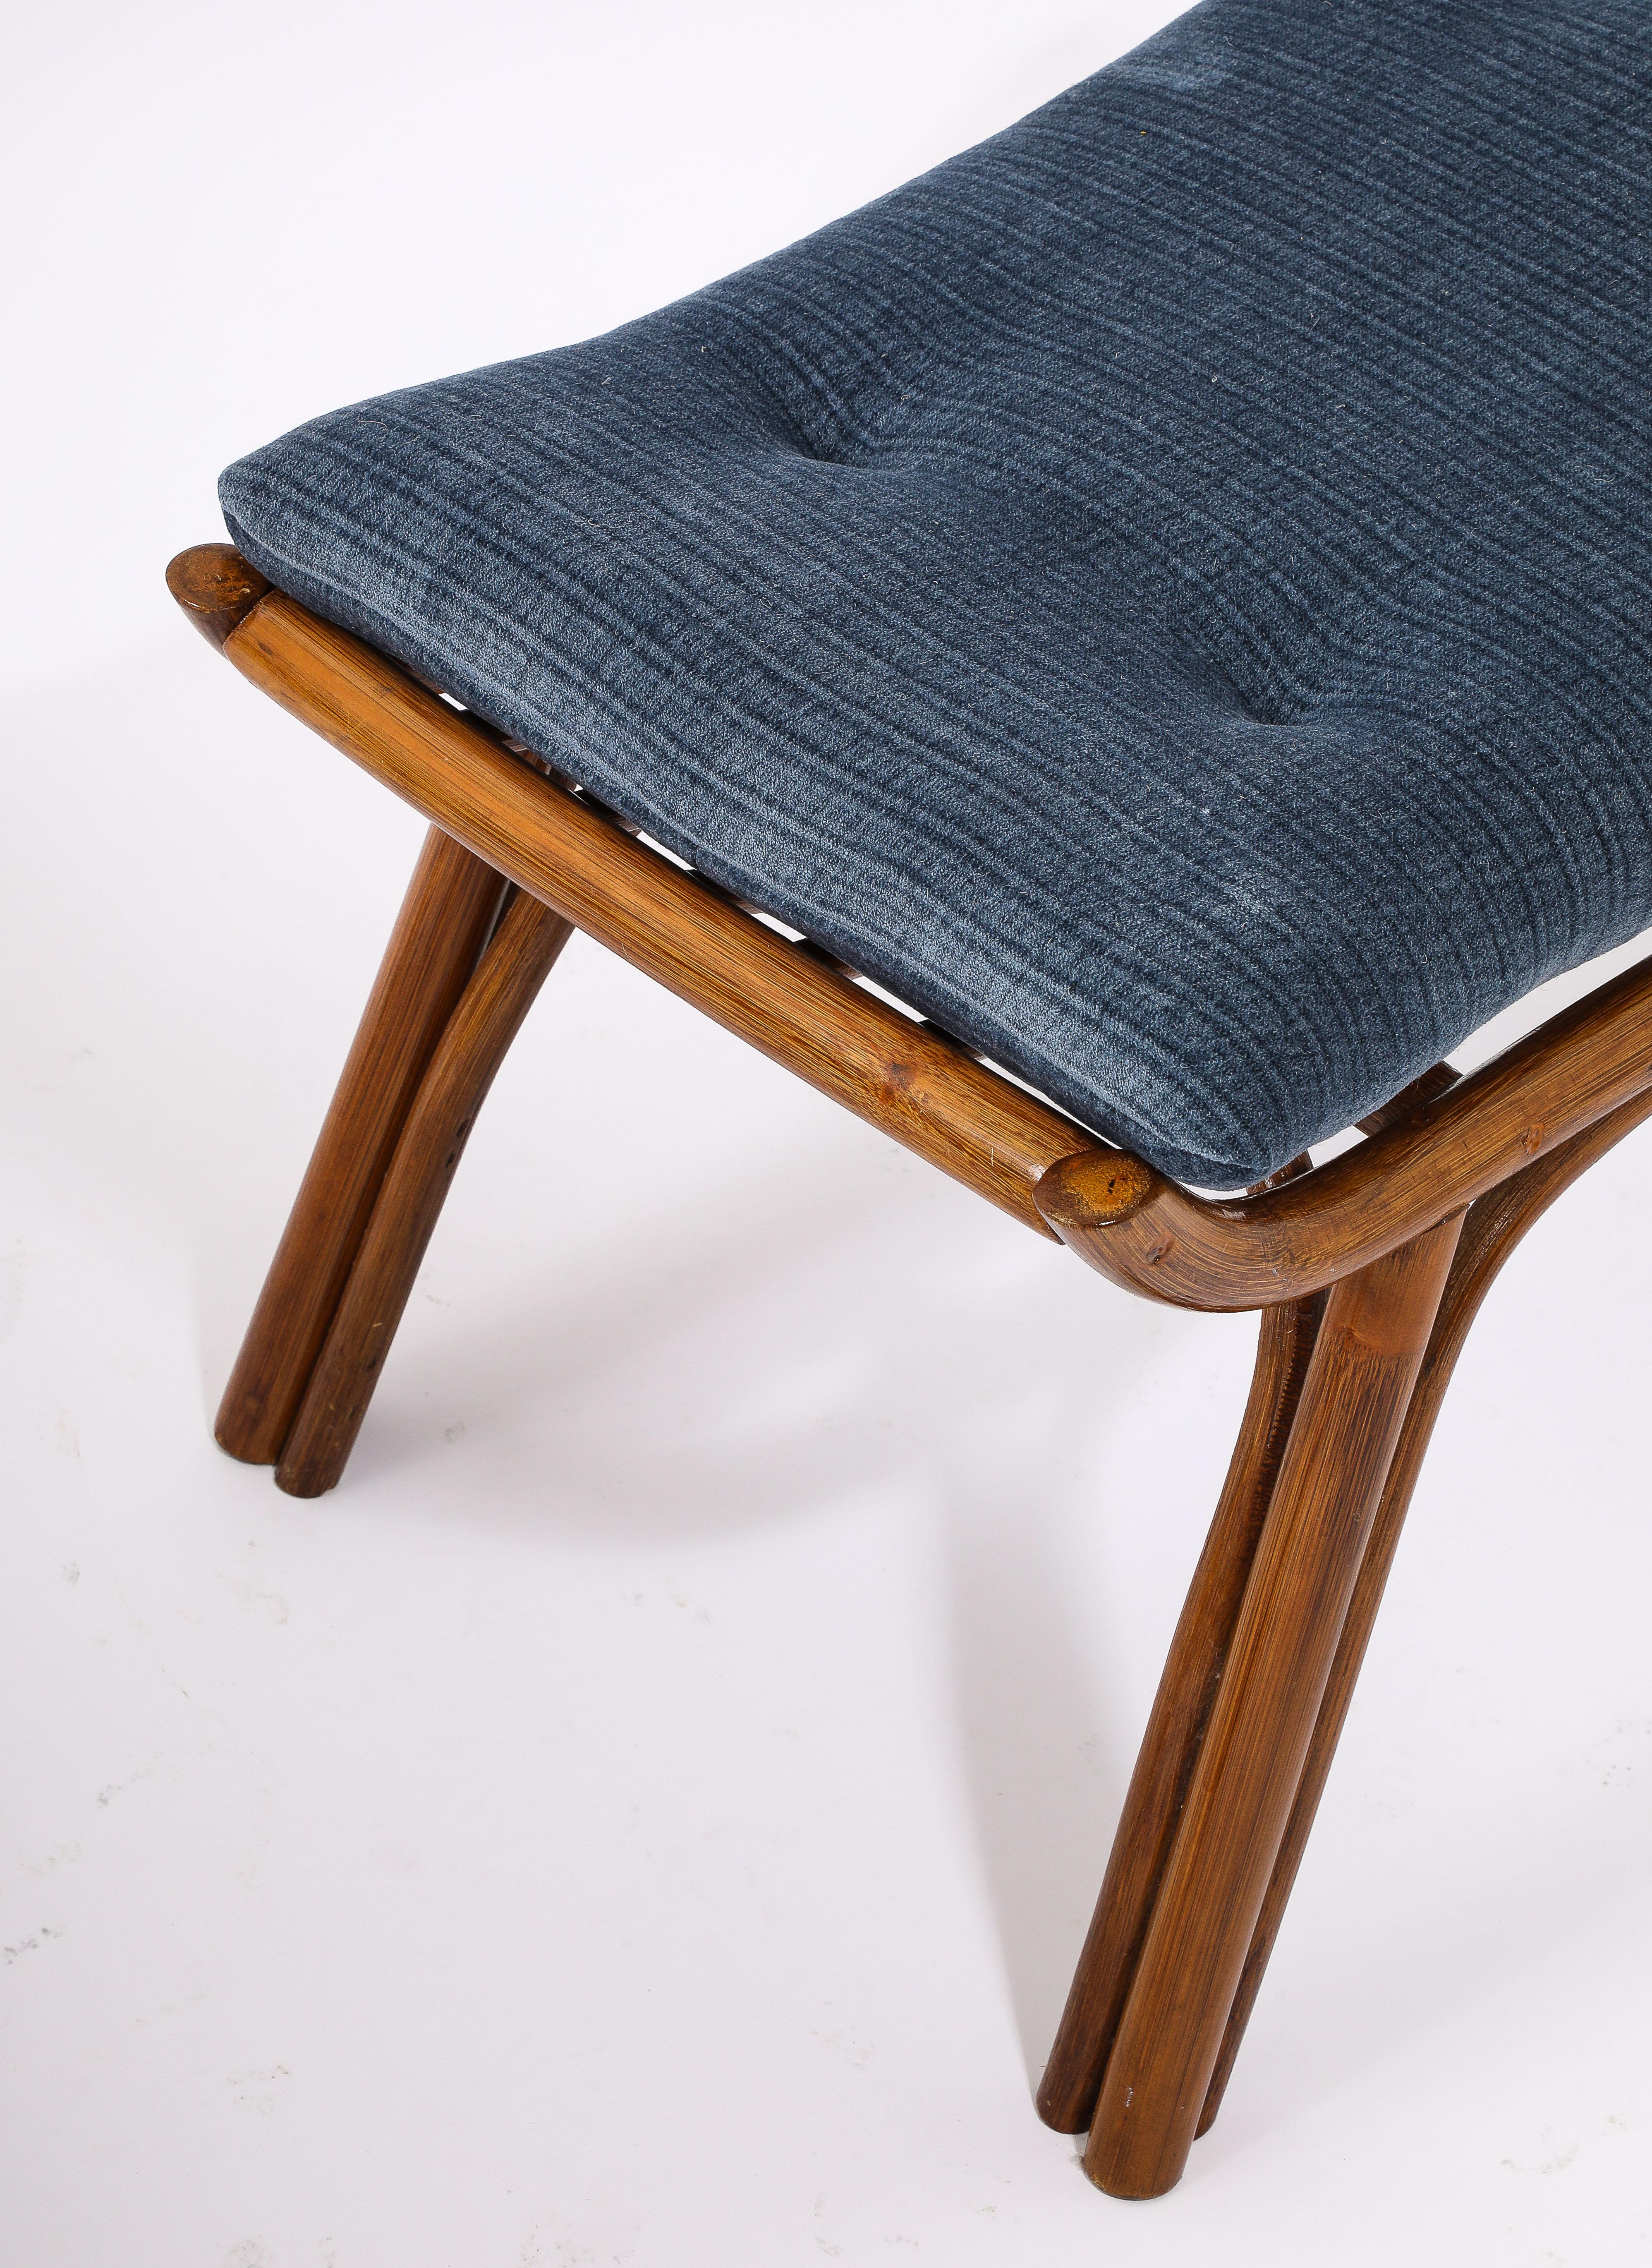 Curved Bamboo Stools in Blue Mohair, France 1950's For Sale 2